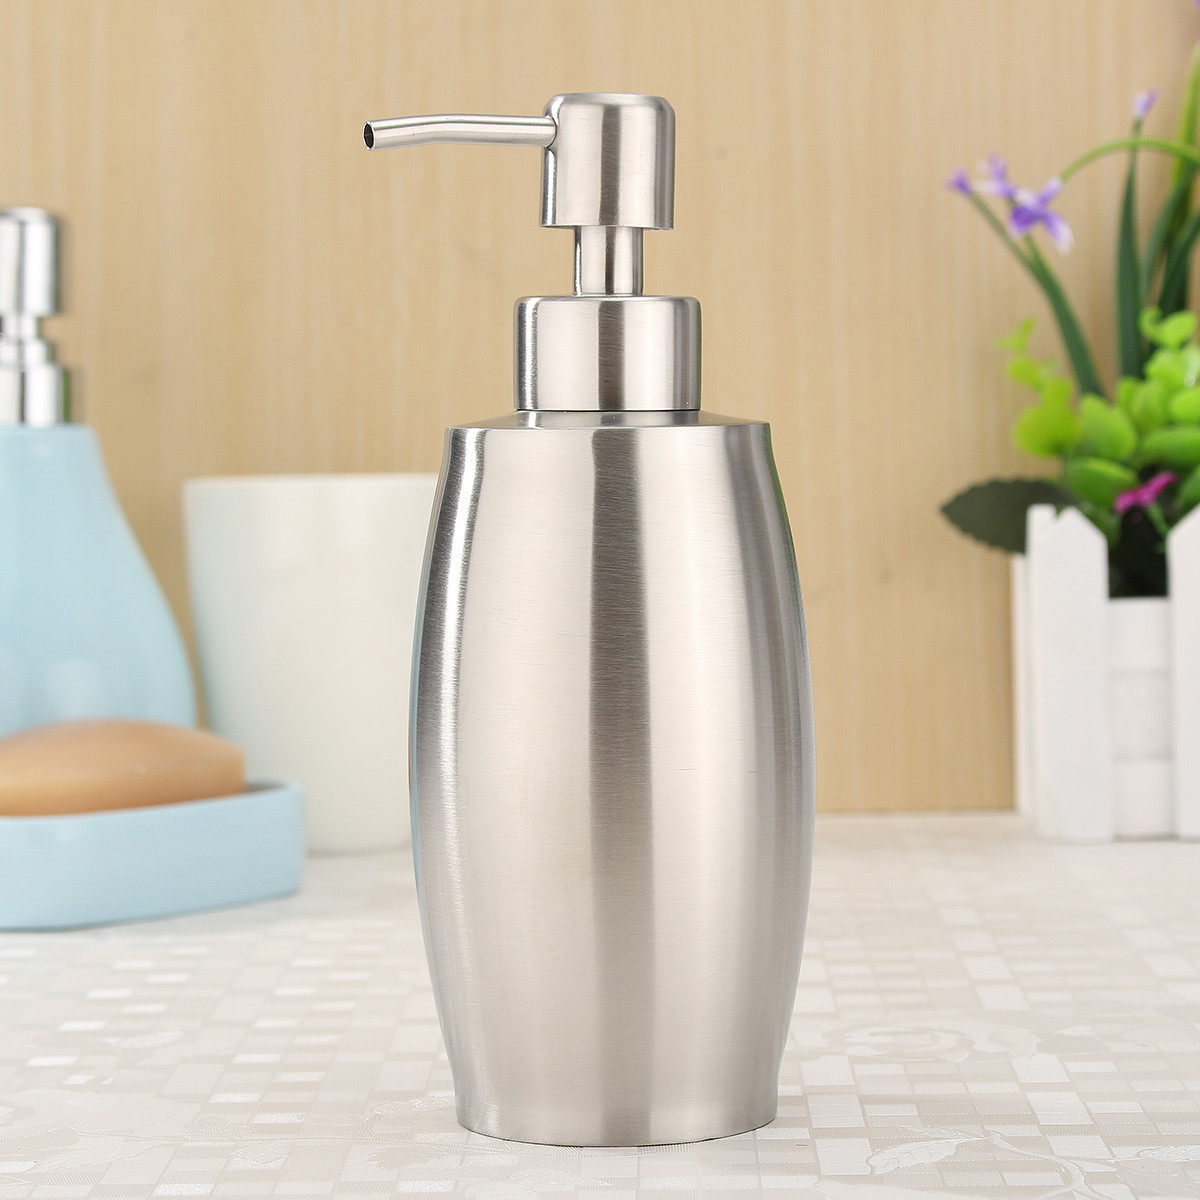 1268OZ375ML-Hand-Soap--Lotion-Pump-Dispenser-Liquid-Shampoo-Container-Stainless-Steel-for-Home-Hotel-1109867-4